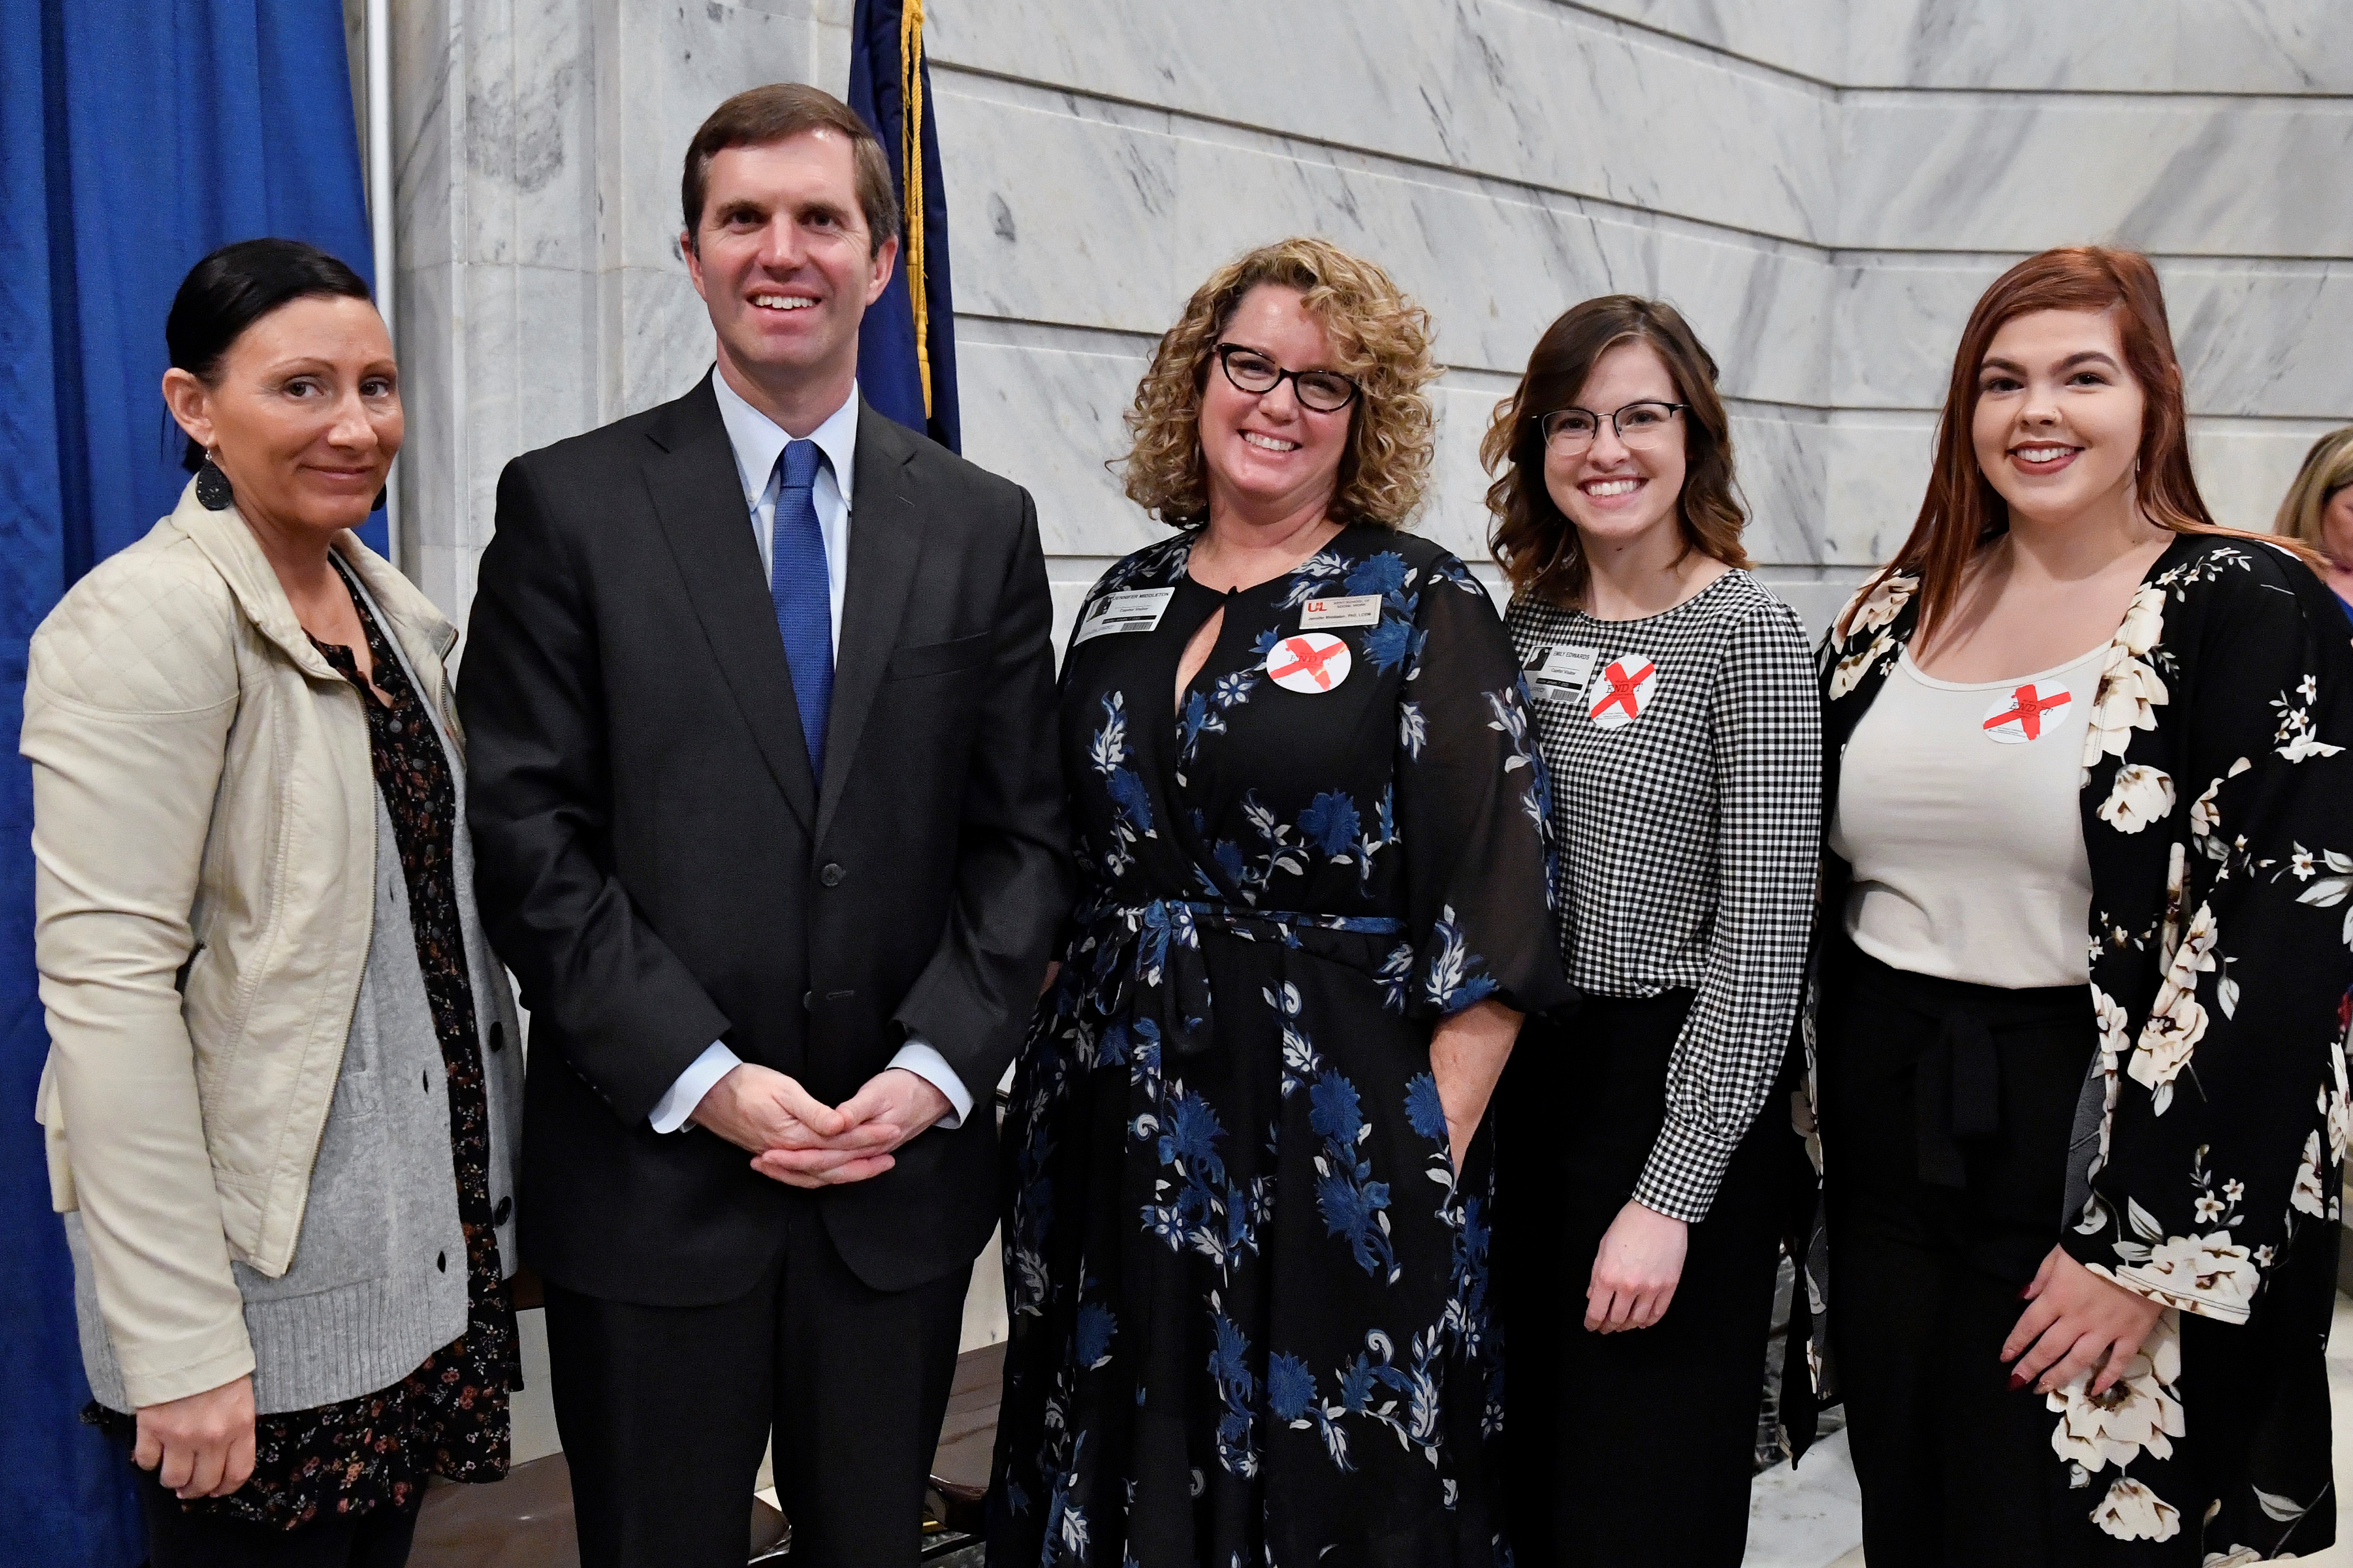 UofL researchers joined Gov. Andy Beshear at a Jan. 7 Capitol Rotunda news conference to raise human trafficking awareness. UofL graduate students Tara Sexton, Emily Edwards and Victoria Dobson are shown with Jennifer Middleton (center), associate professor of social work and director of the Human Trafficking Research Institute. Credit Timothy D. Easley.